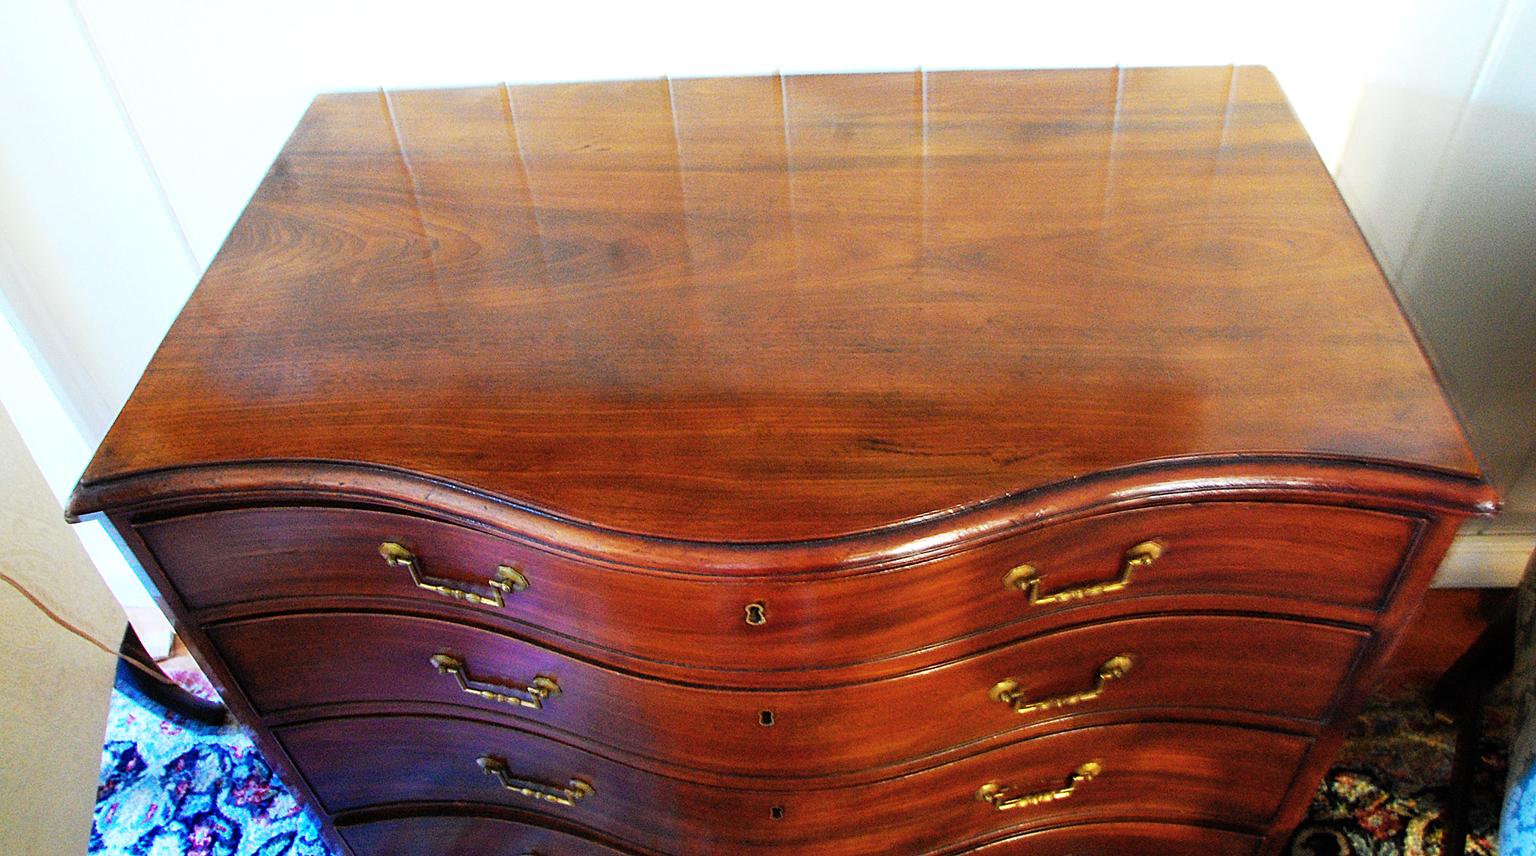 English Georgian Chippendale period mahogany serpentine chest of four graduated molded edge drawers, bracket base. Small size and stylish height makes this serpentine chest particularly desirable, circa 1790.